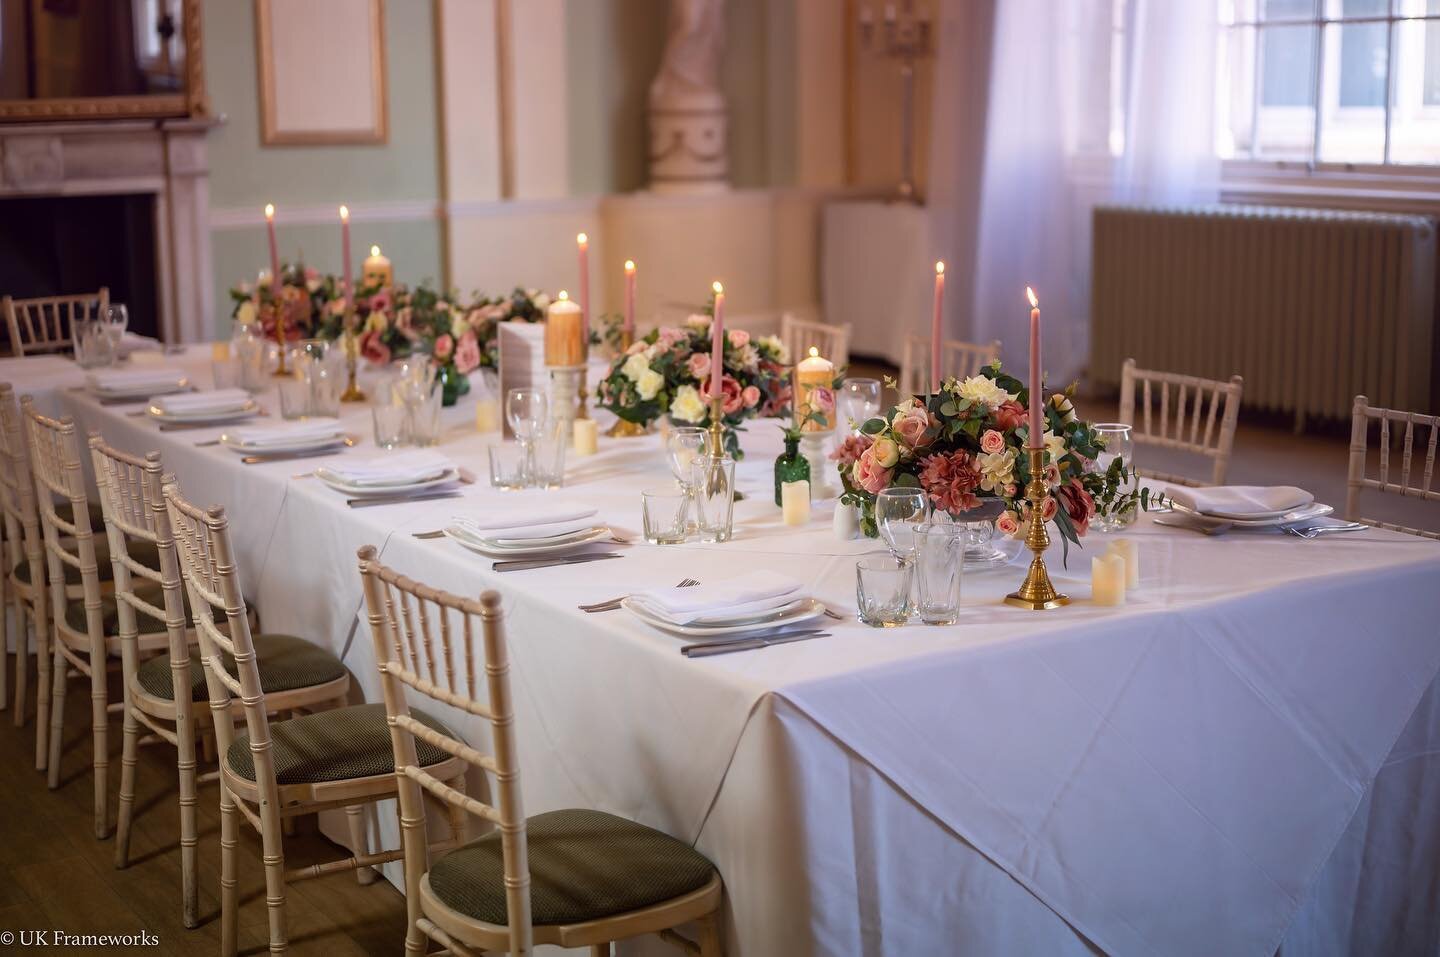 BLUSH BEAUTY TABLESCAPE

From intimate meals after your ceremony to more larger guest list sizes let us look after your styling of florals for that extra special detail 

Photography @ukframeworks 
Venue @thecityroomsleic 
Design &amp; styling @niche